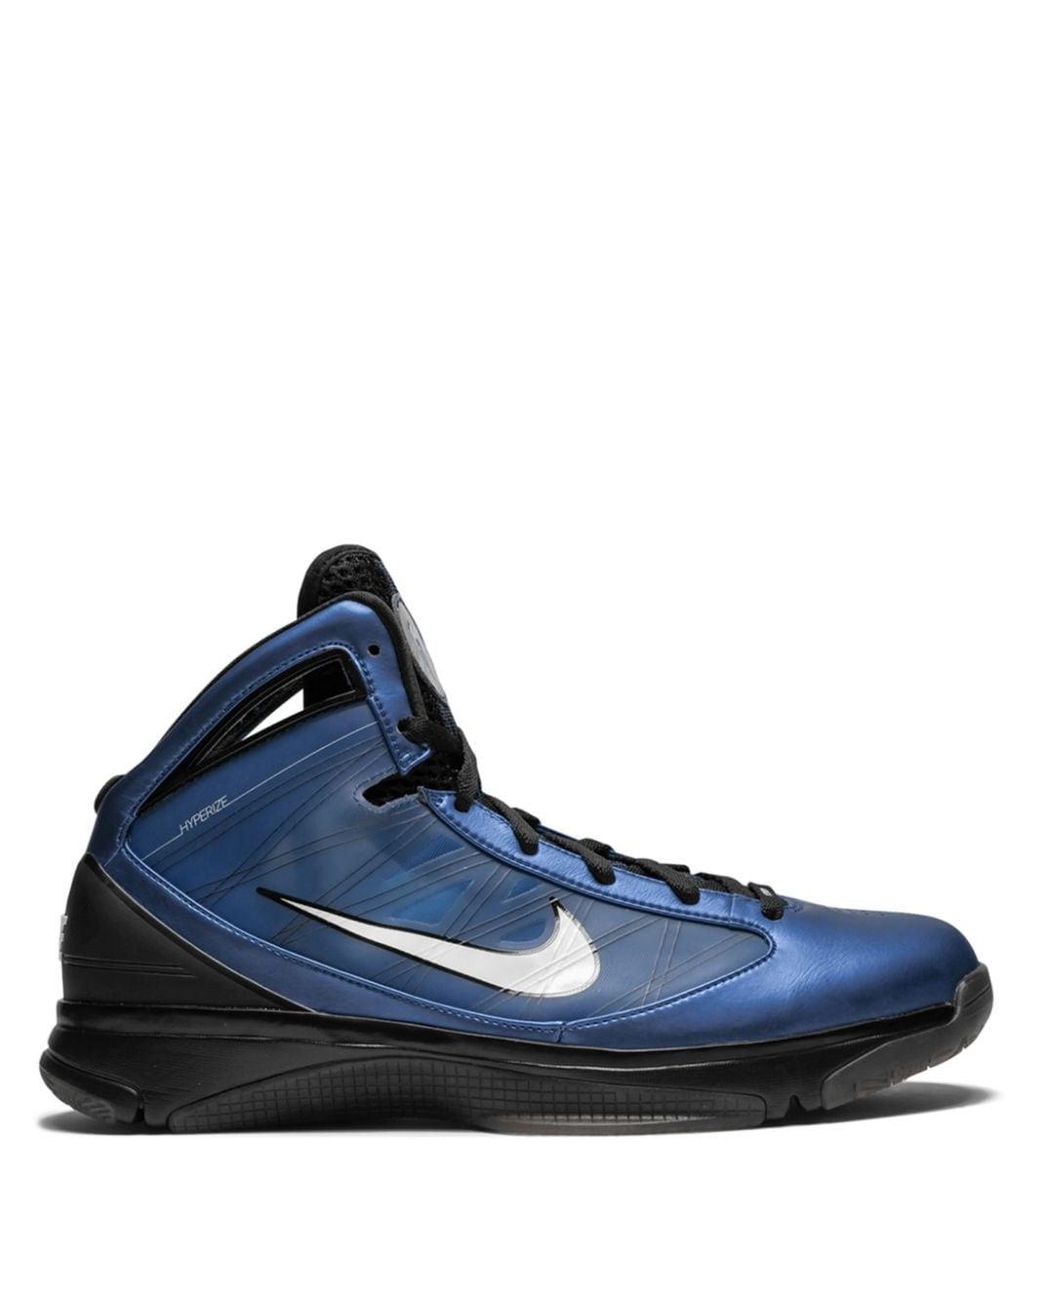 Nike Rubber Hyperize Supreme Sneakers in Blue for Men - Save 56% - Lyst